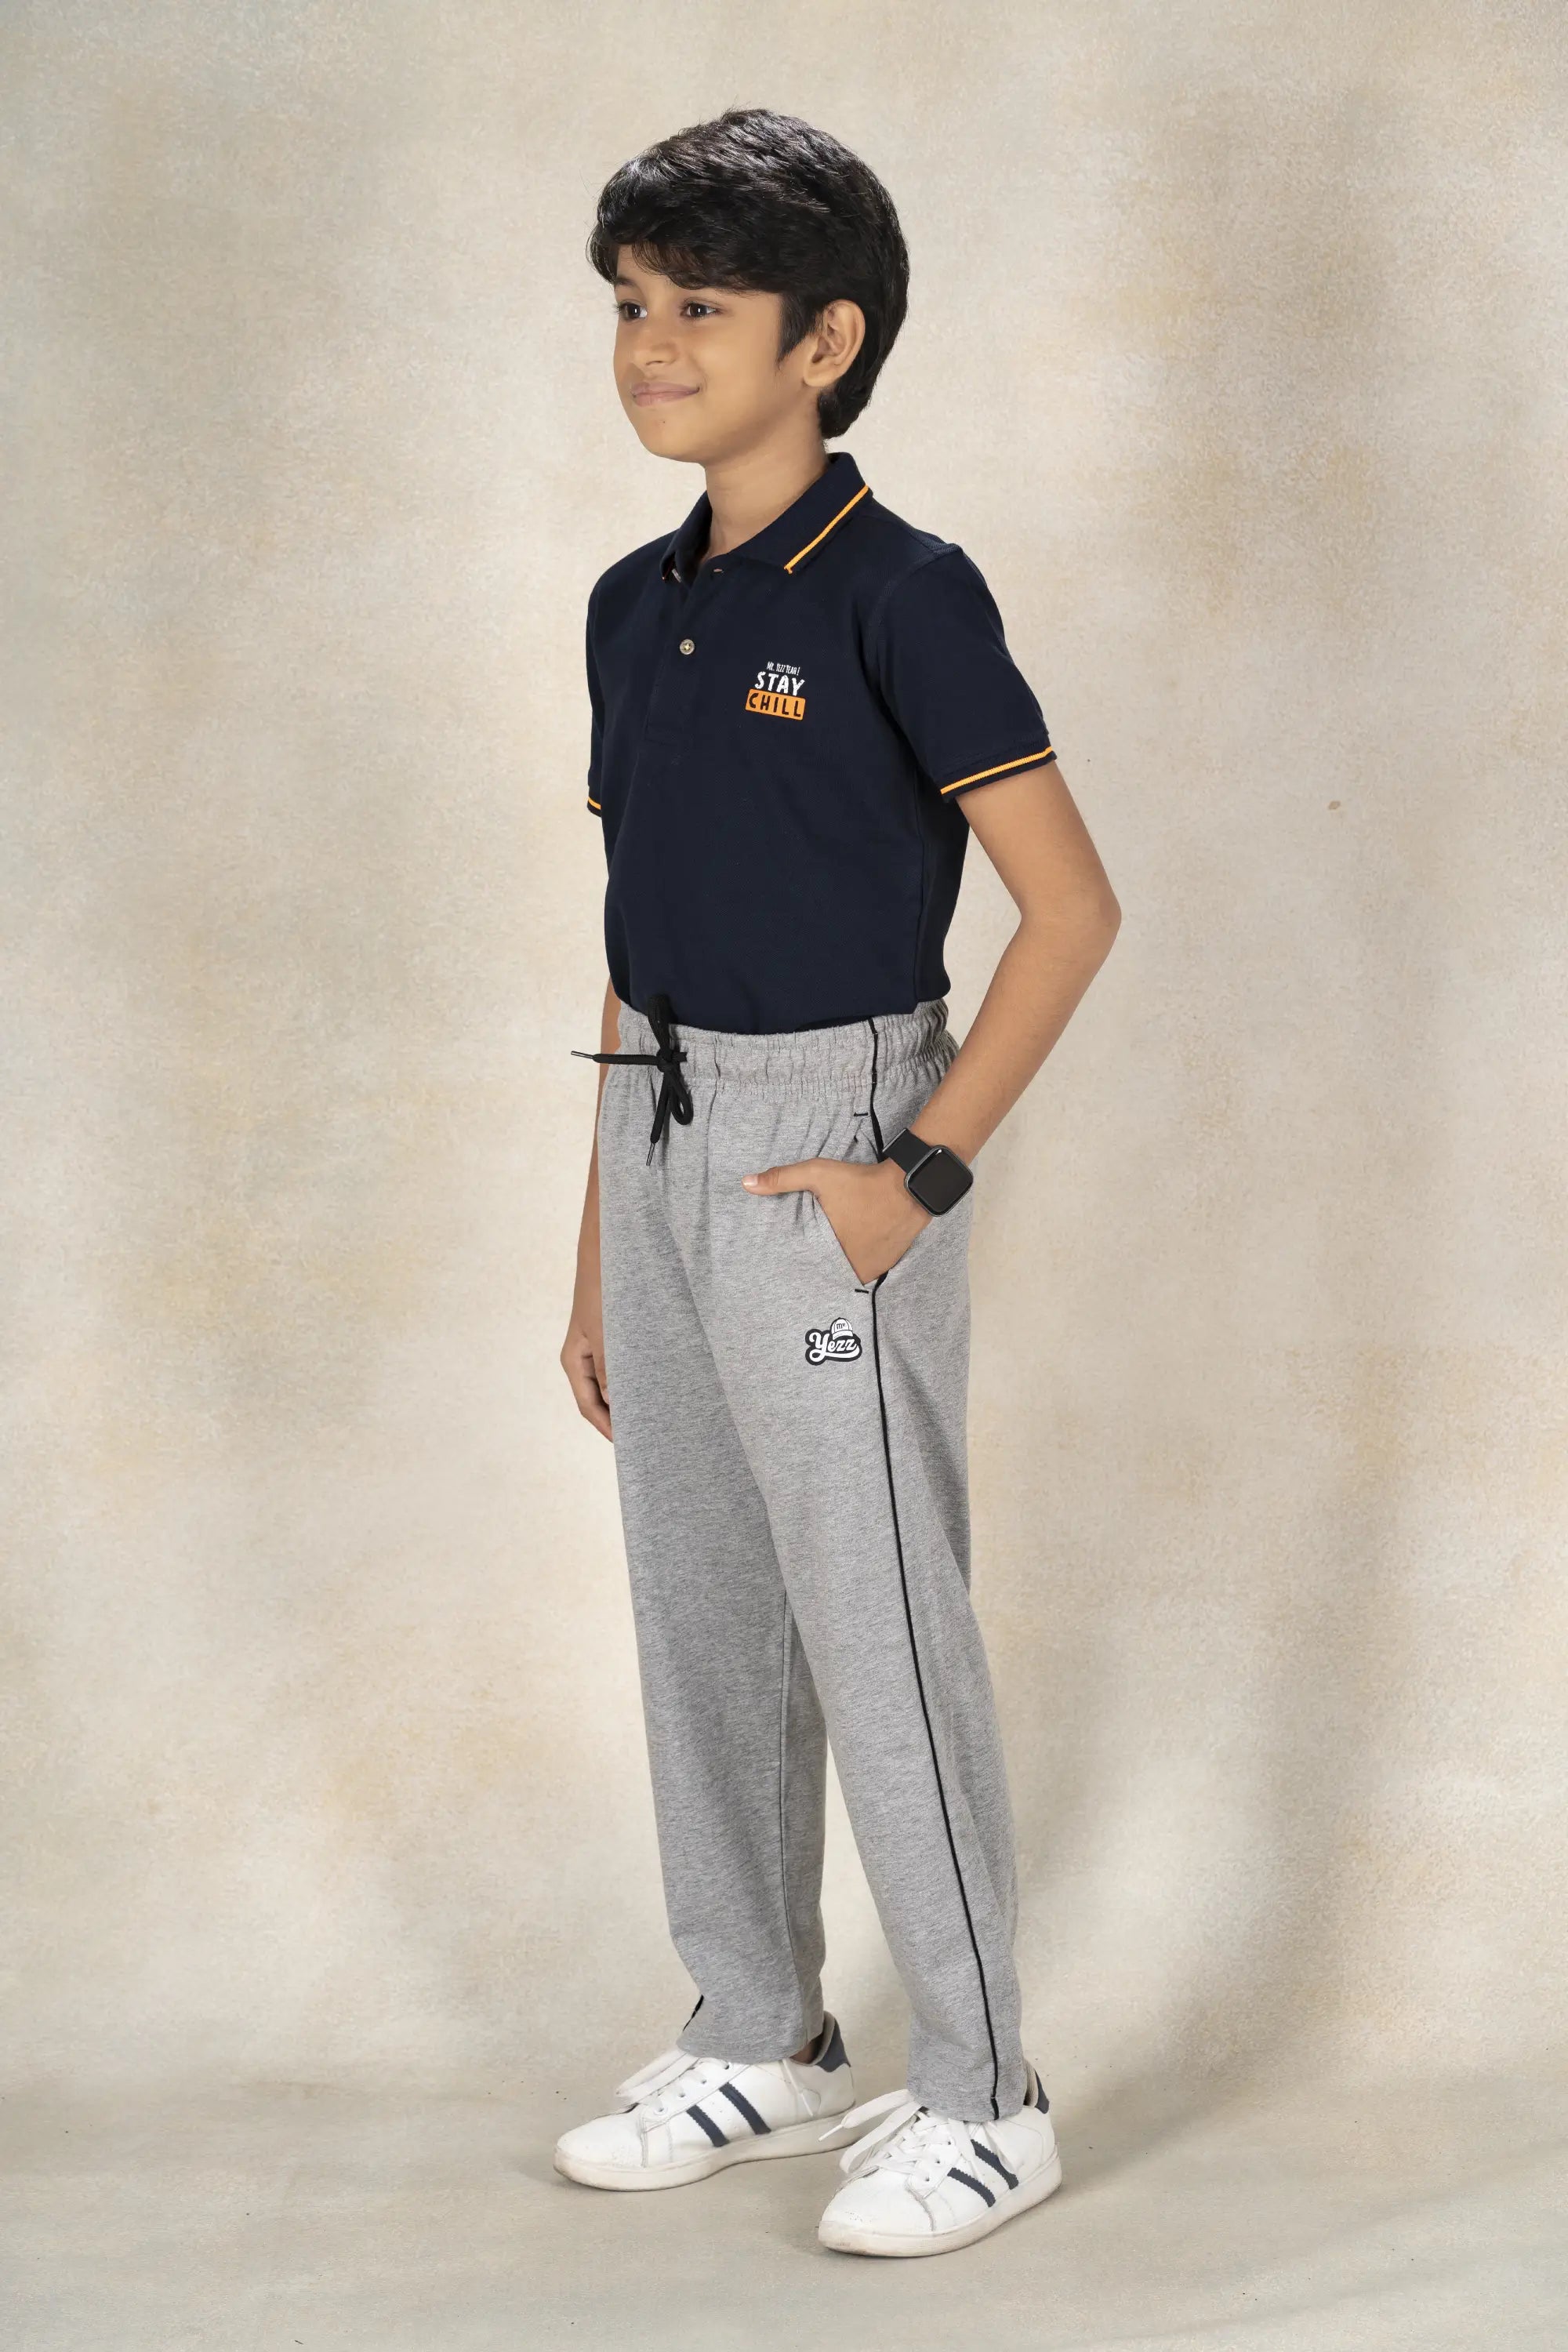 Trendy Dukaan Track Pant For Boys Price in India - Buy Trendy Dukaan Track  Pant For Boys online at